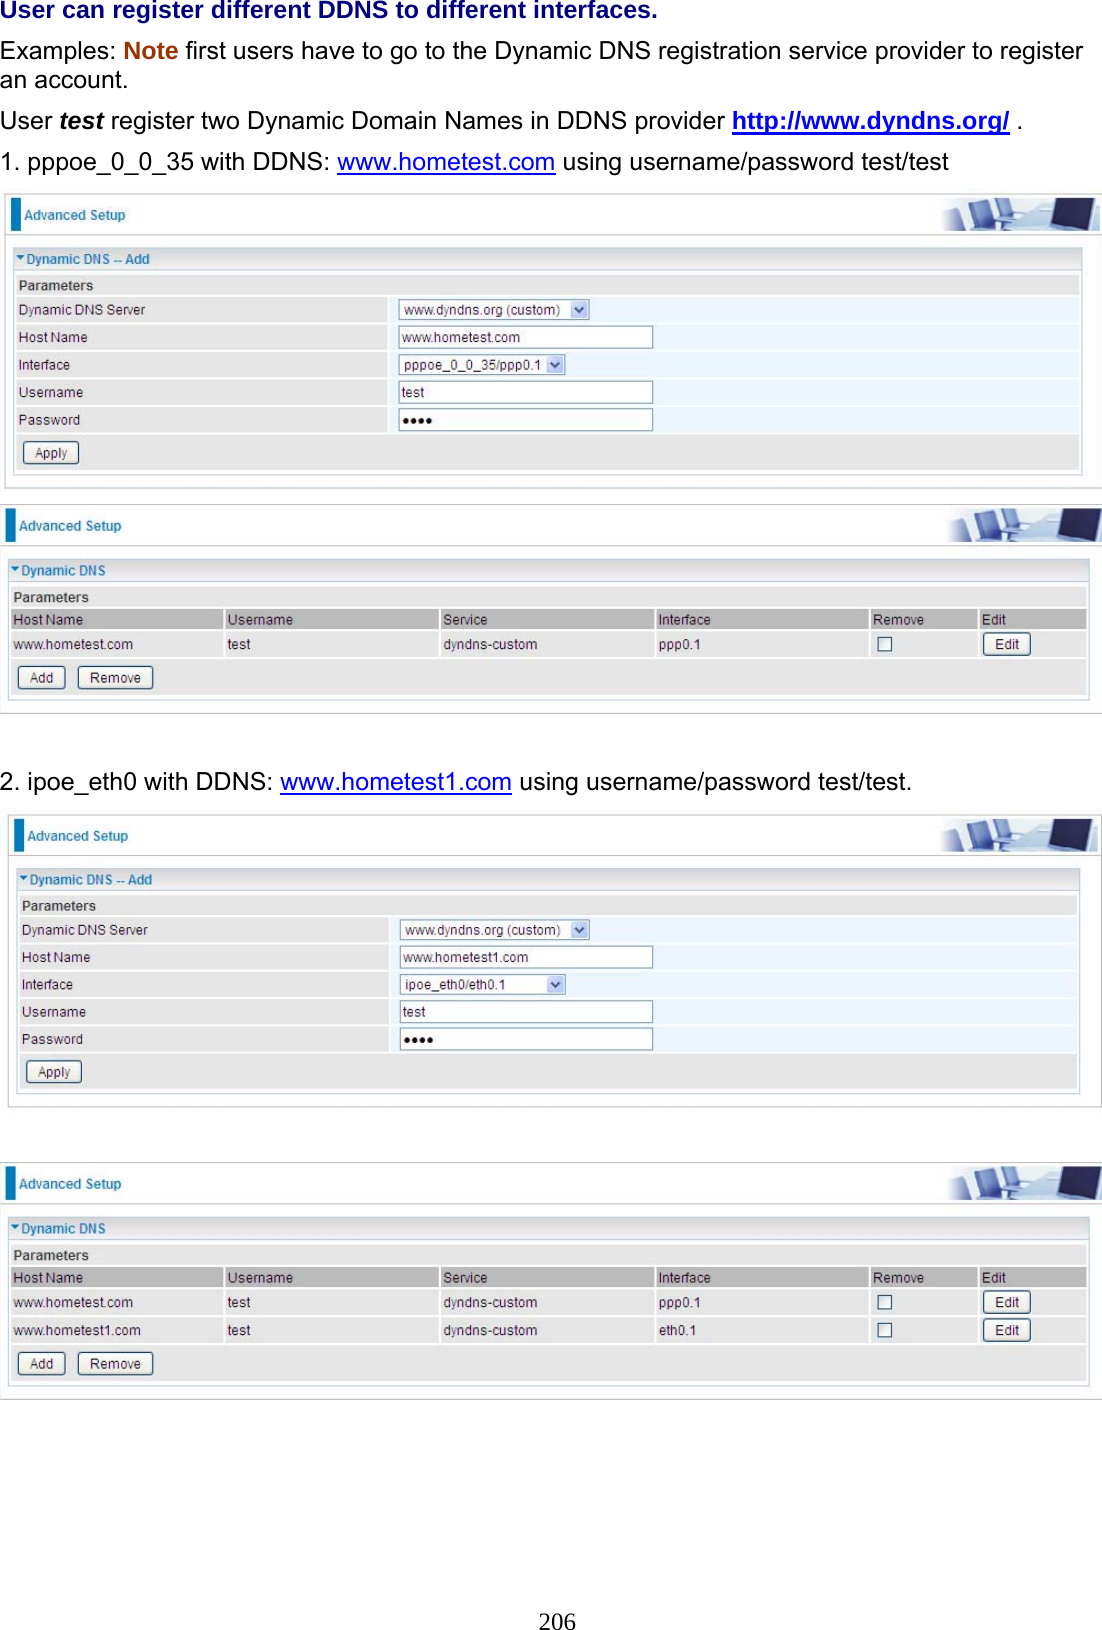 206 User can register different DDNS to different interfaces. Examples: Note first users have to go to the Dynamic DNS registration service provider to register an account. User test register two Dynamic Domain Names in DDNS provider http://www.dyndns.org/ . 1. pppoe_0_0_35 with DDNS: www.hometest.com using username/password test/test    2. ipoe_eth0 with DDNS: www.hometest1.com using username/password test/test.     